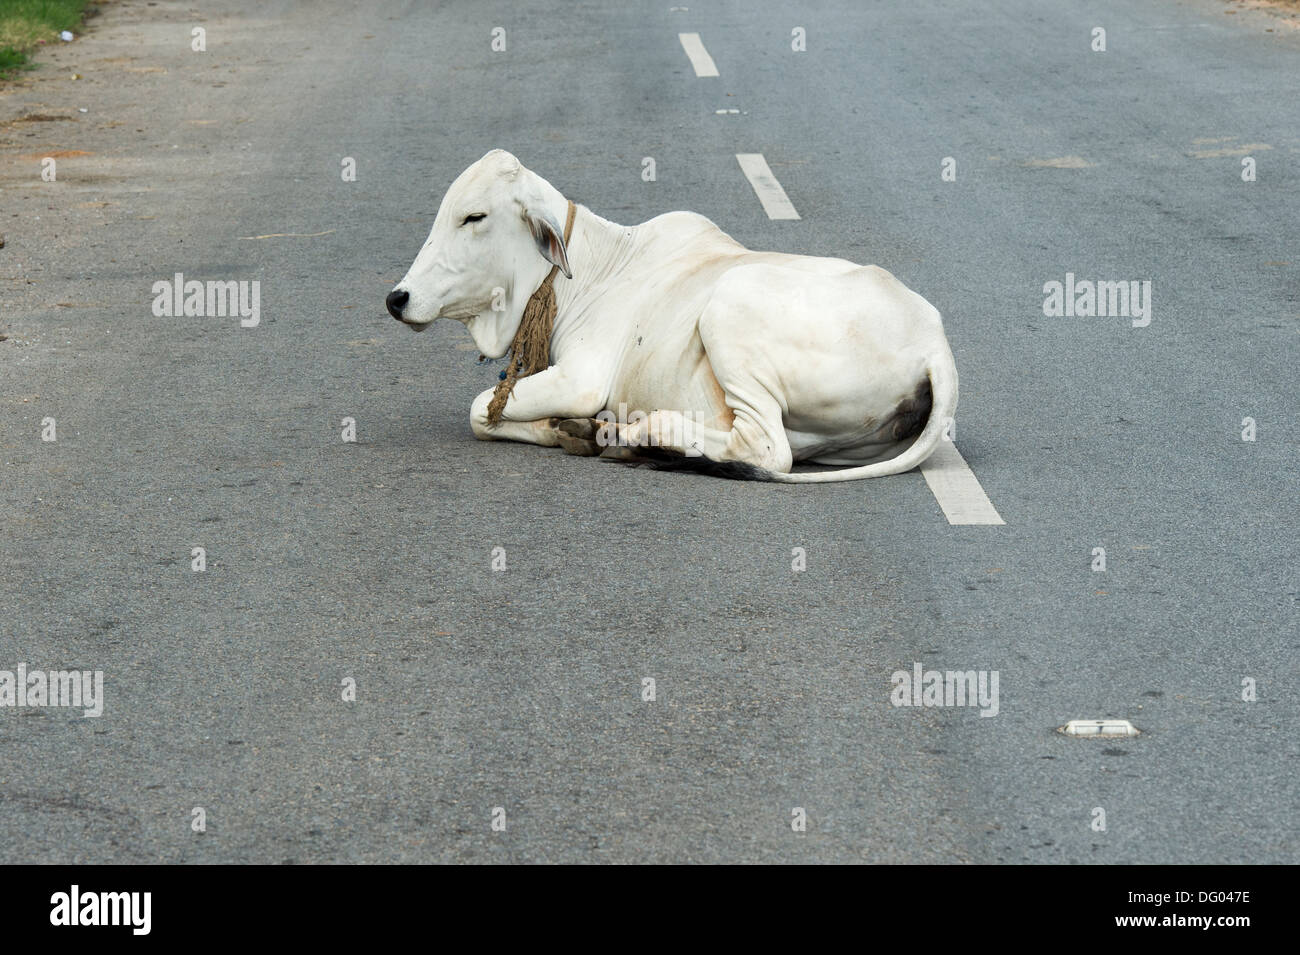 Bos primigenius indicus. Indian cow / Zebu sitting in the middle of a road. Andhra Pradesh, India Stock Photo